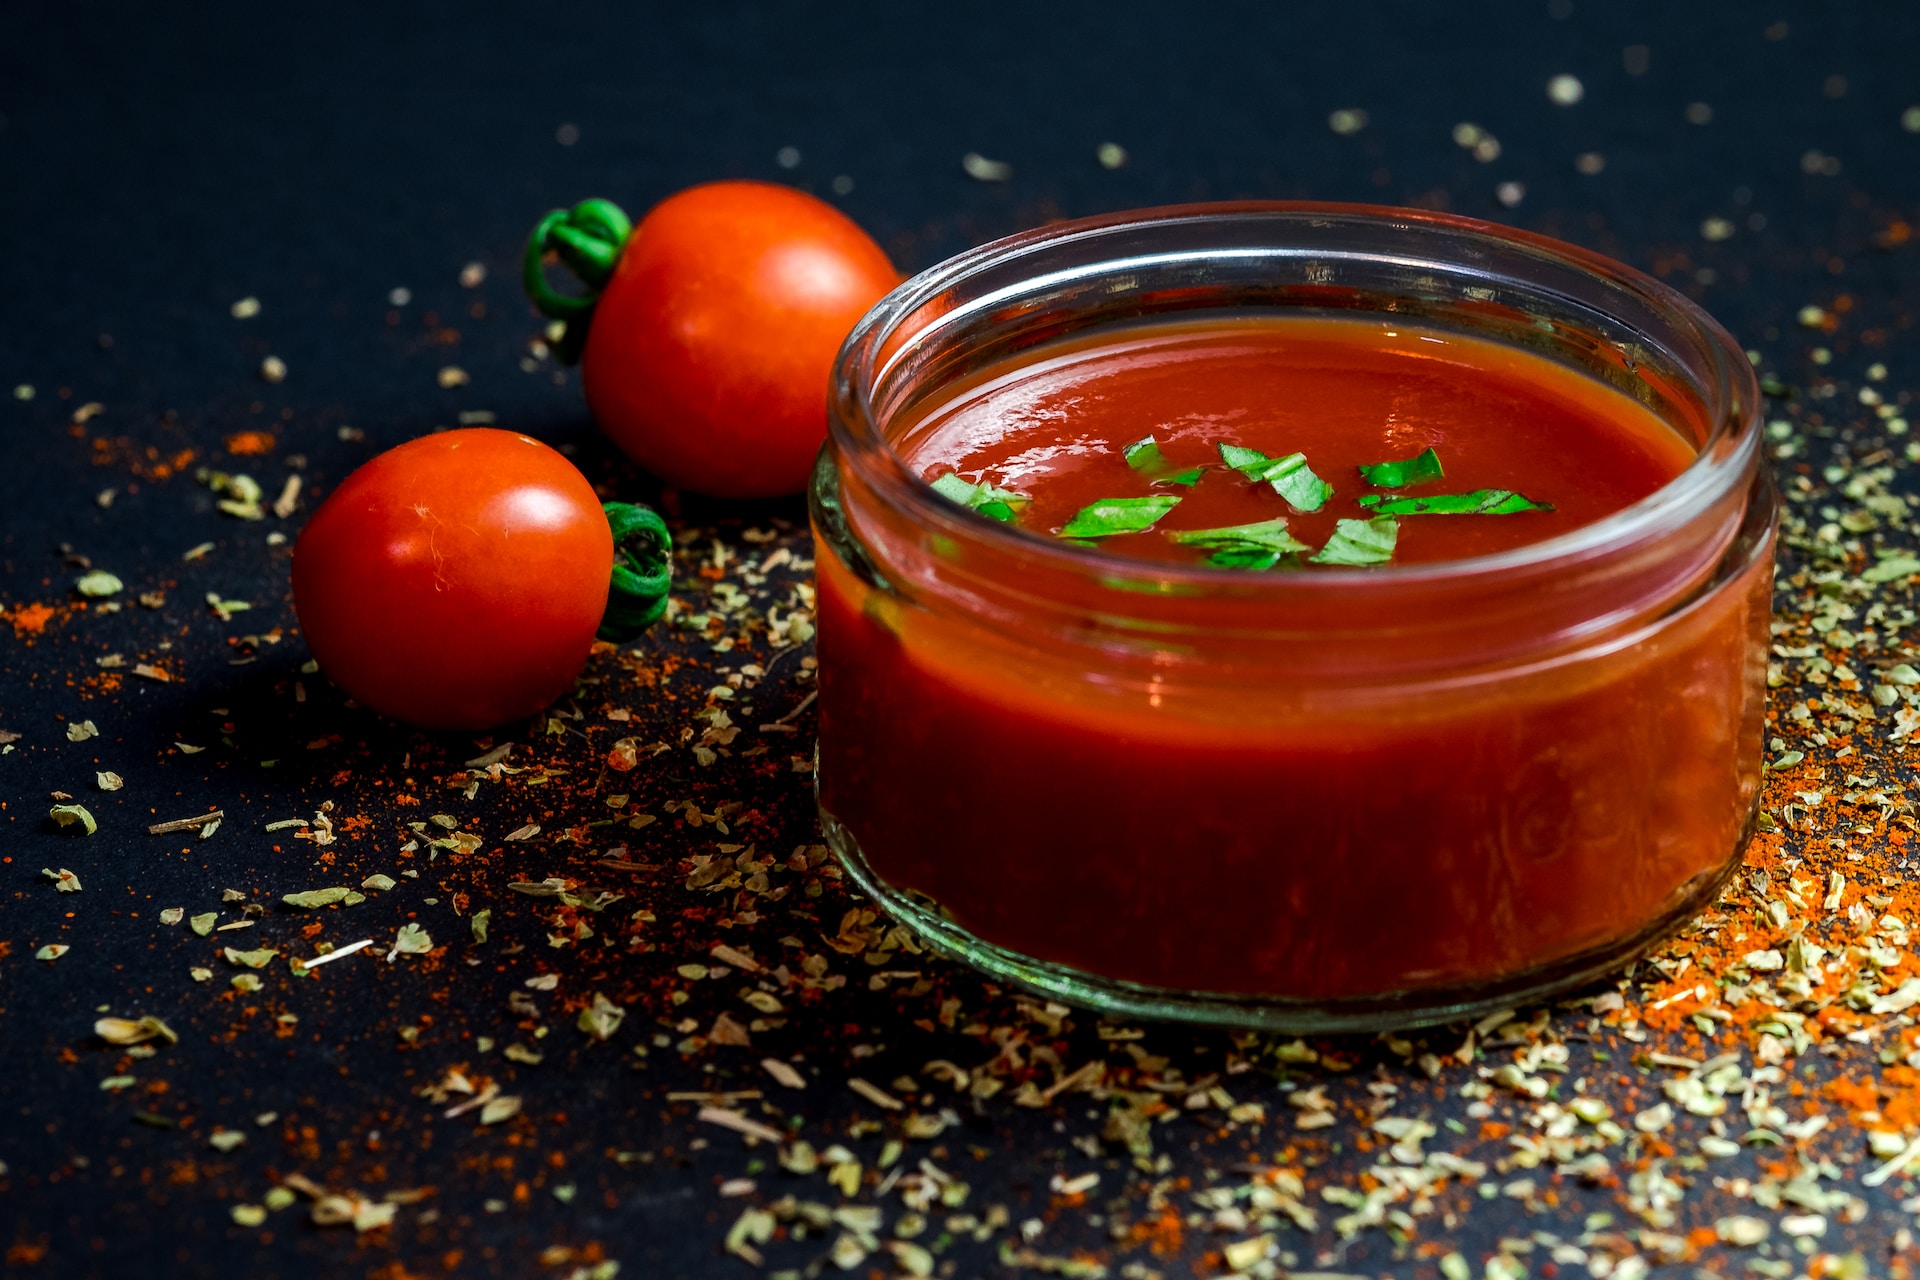 Tips on storing your homemade pizza sauce